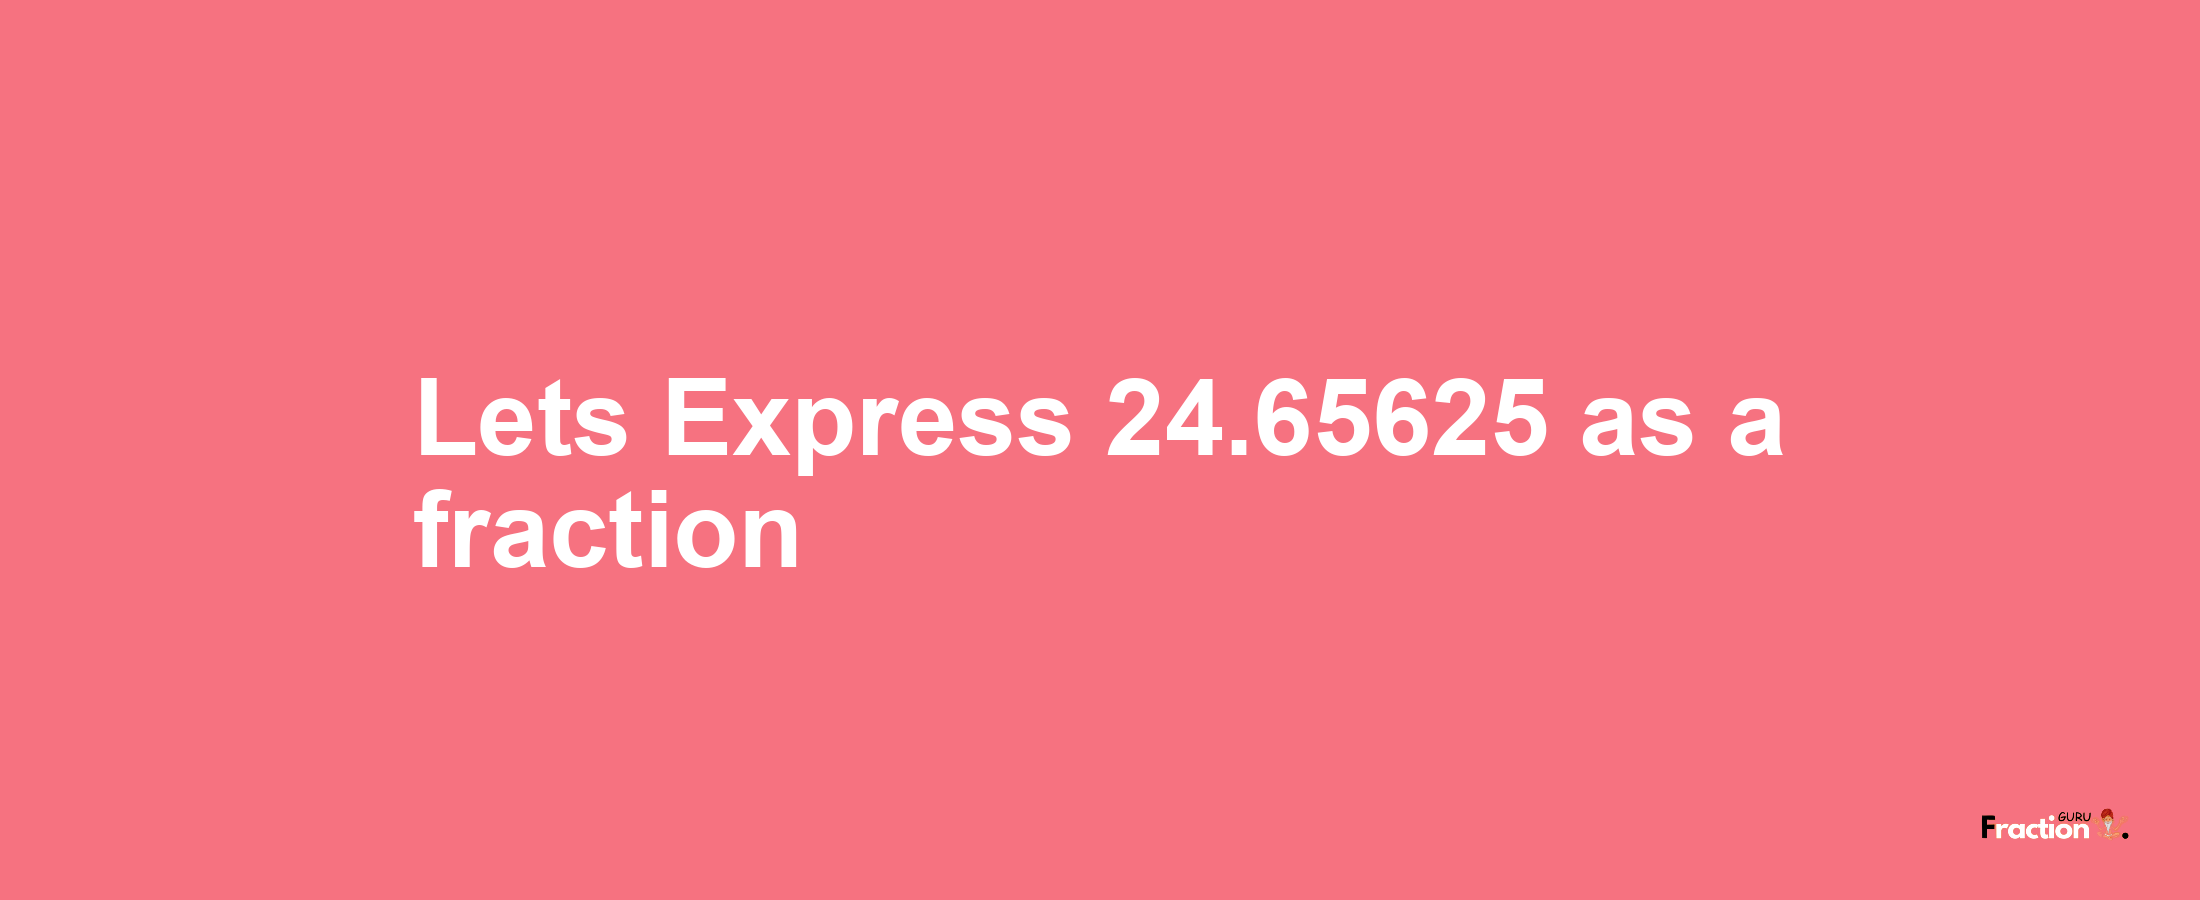 Lets Express 24.65625 as afraction